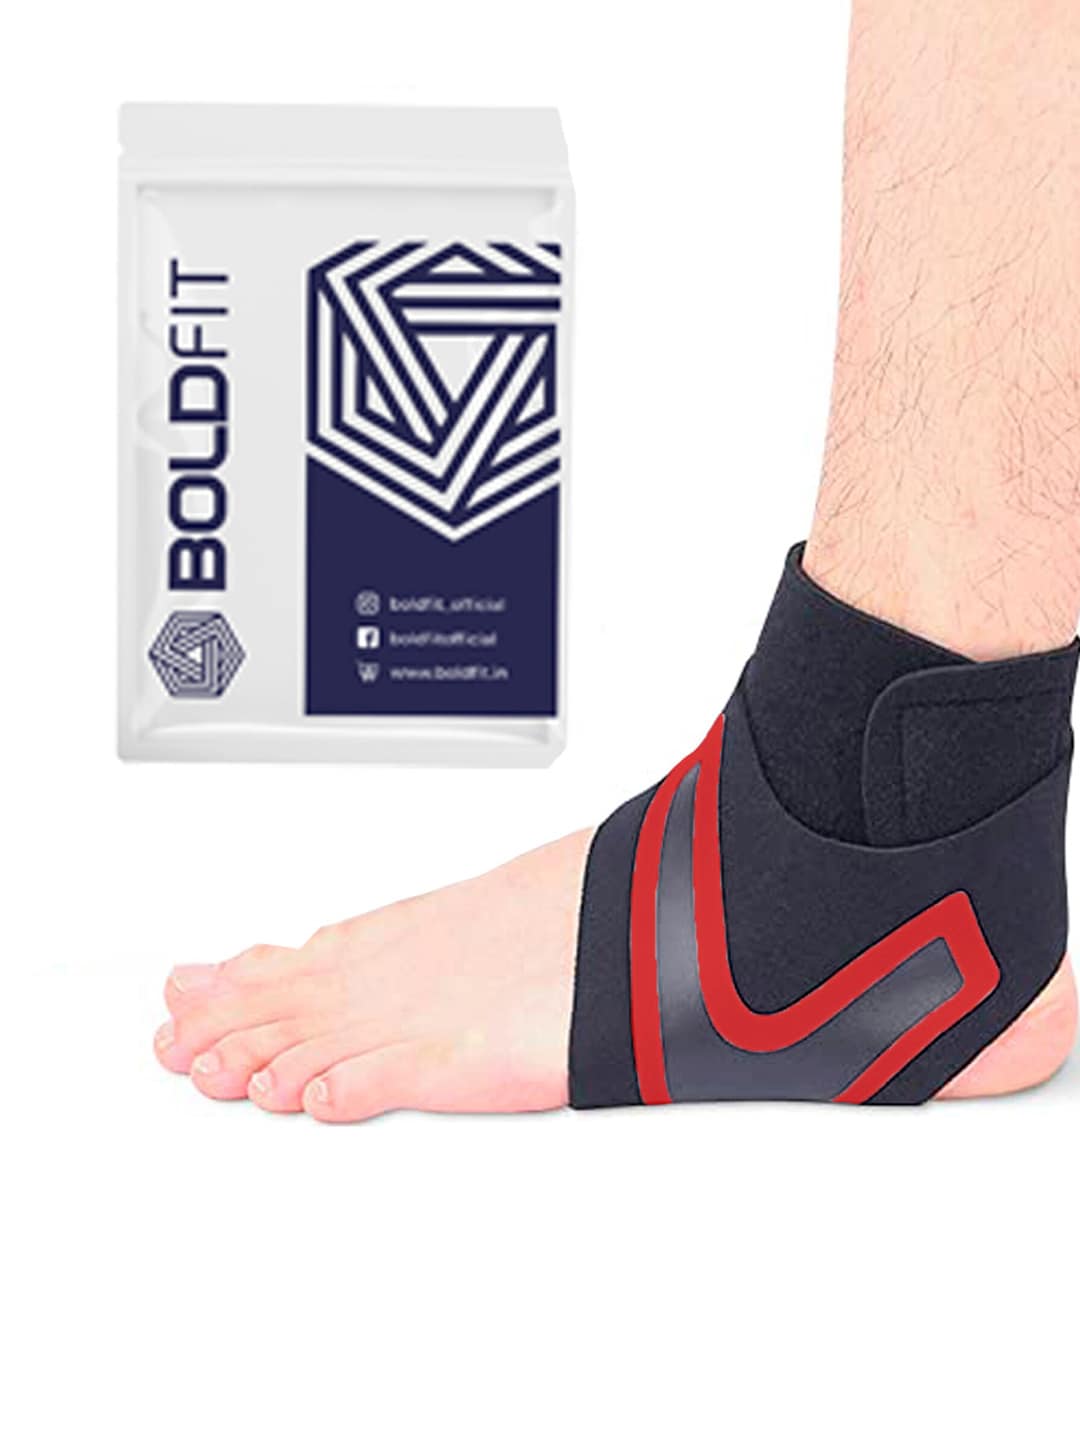 BOLDFIT Unisex Black & Red Ankle Support Wrap for Pain Relief Compression Brace for Injuries Price in India